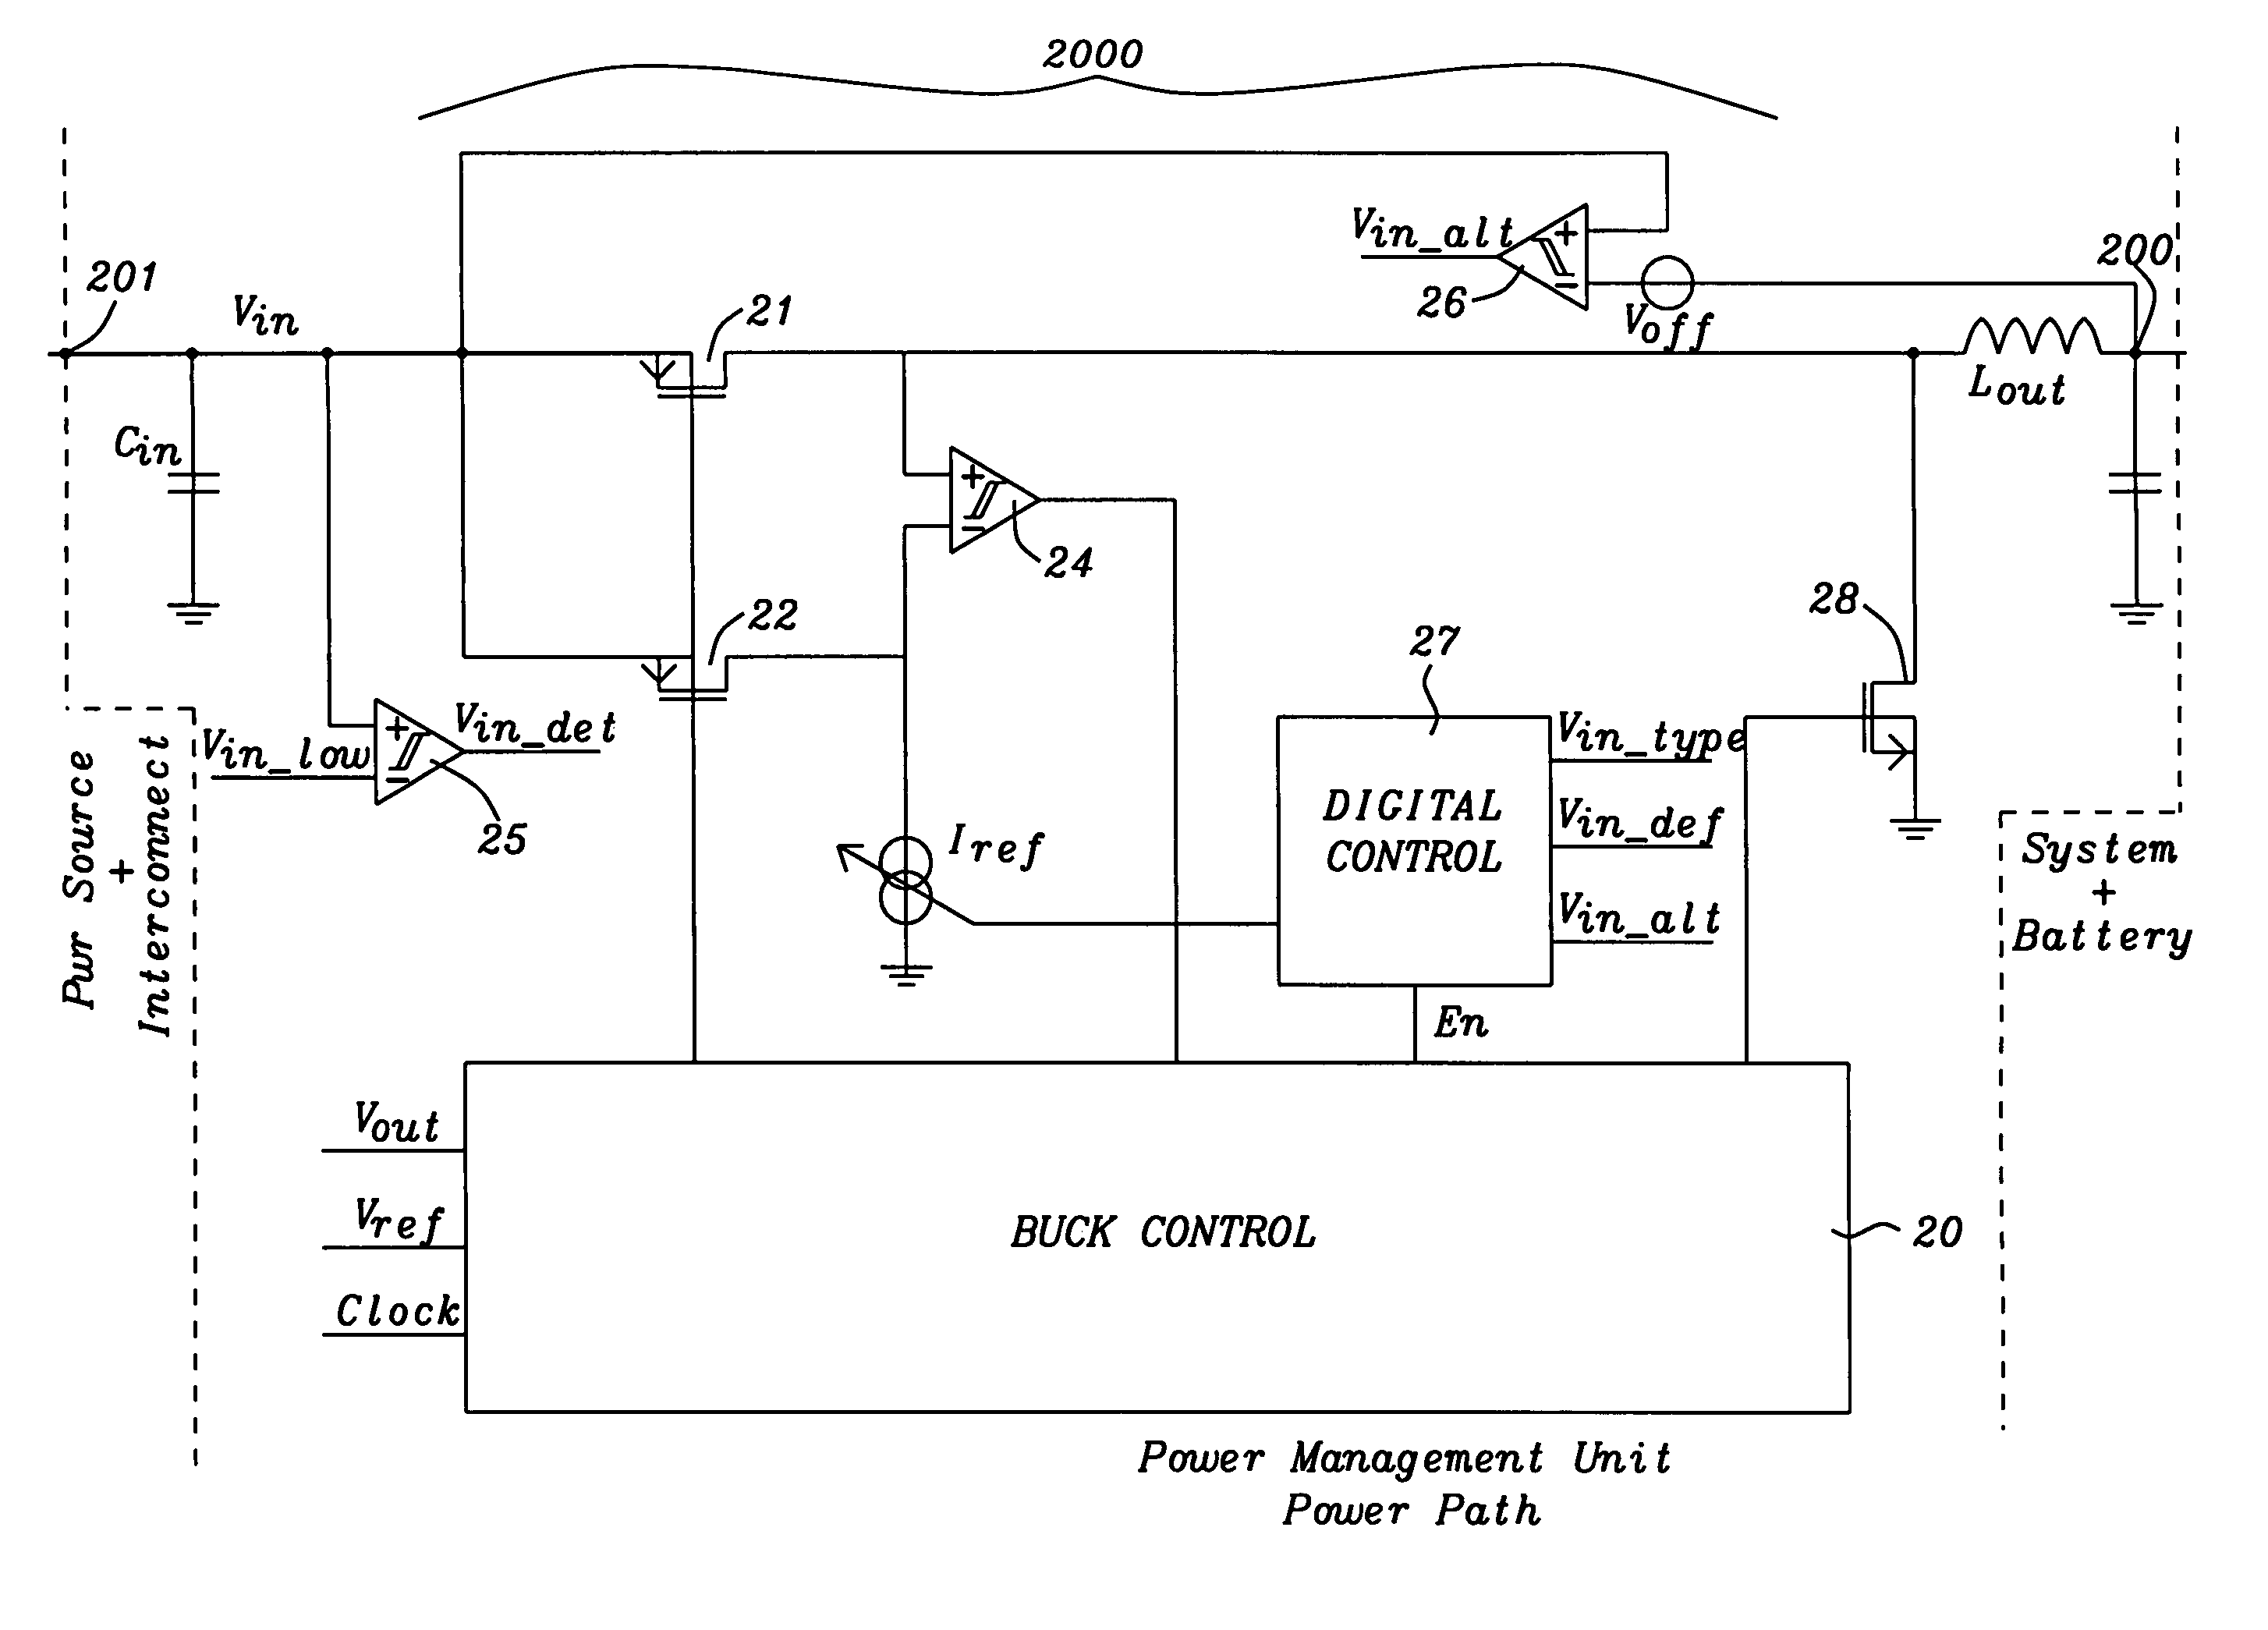 Automatic current limit adjustment for linear and switching regulators